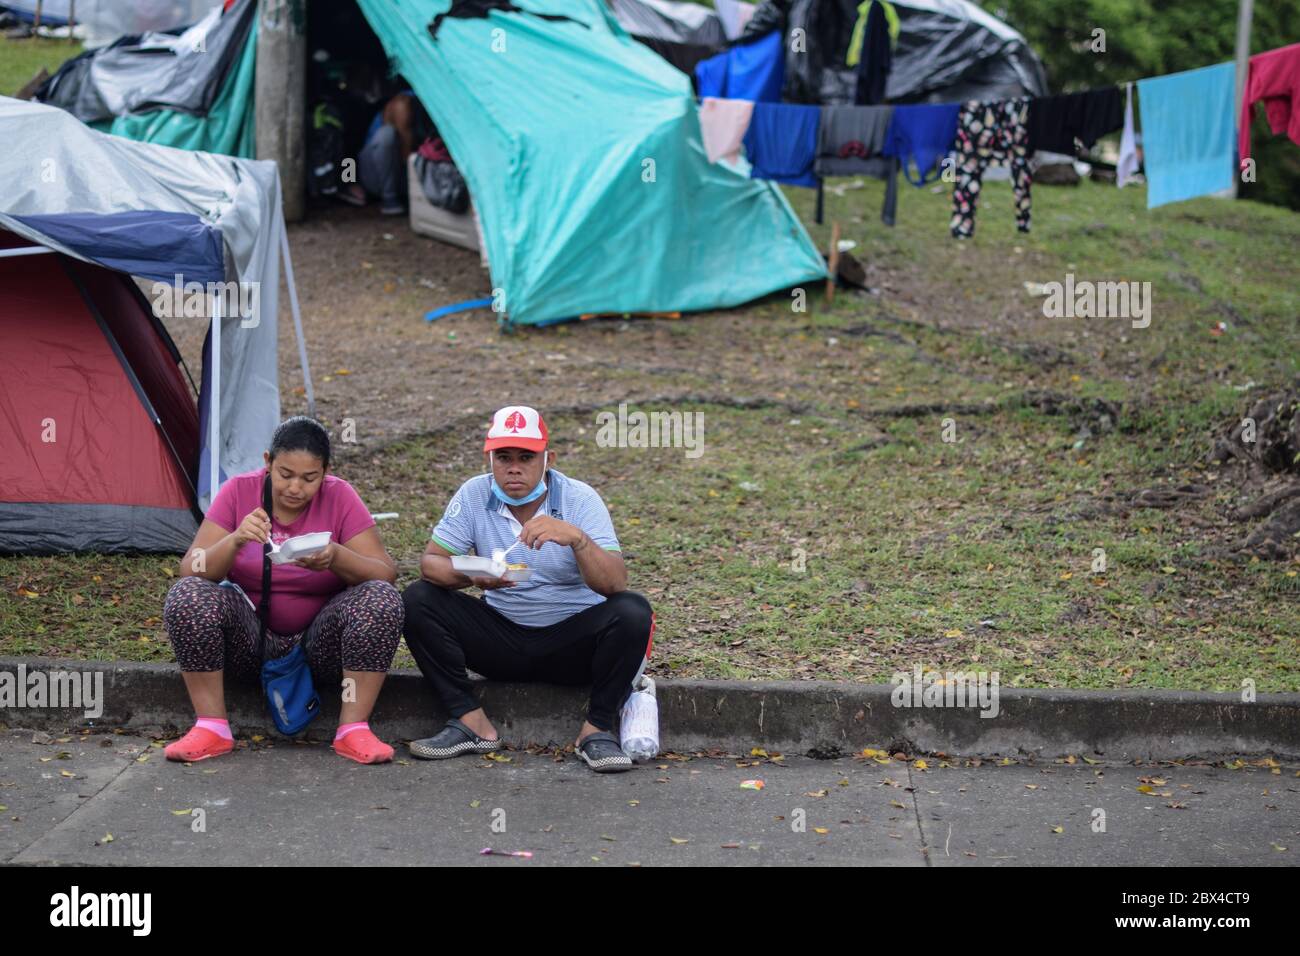 Members of 'Pescador de Hombres' foundation bring good to Venezuelans stranded in a makeshift camp amid Covid-19 pandemic, waiting for an opportunity Stock Photo